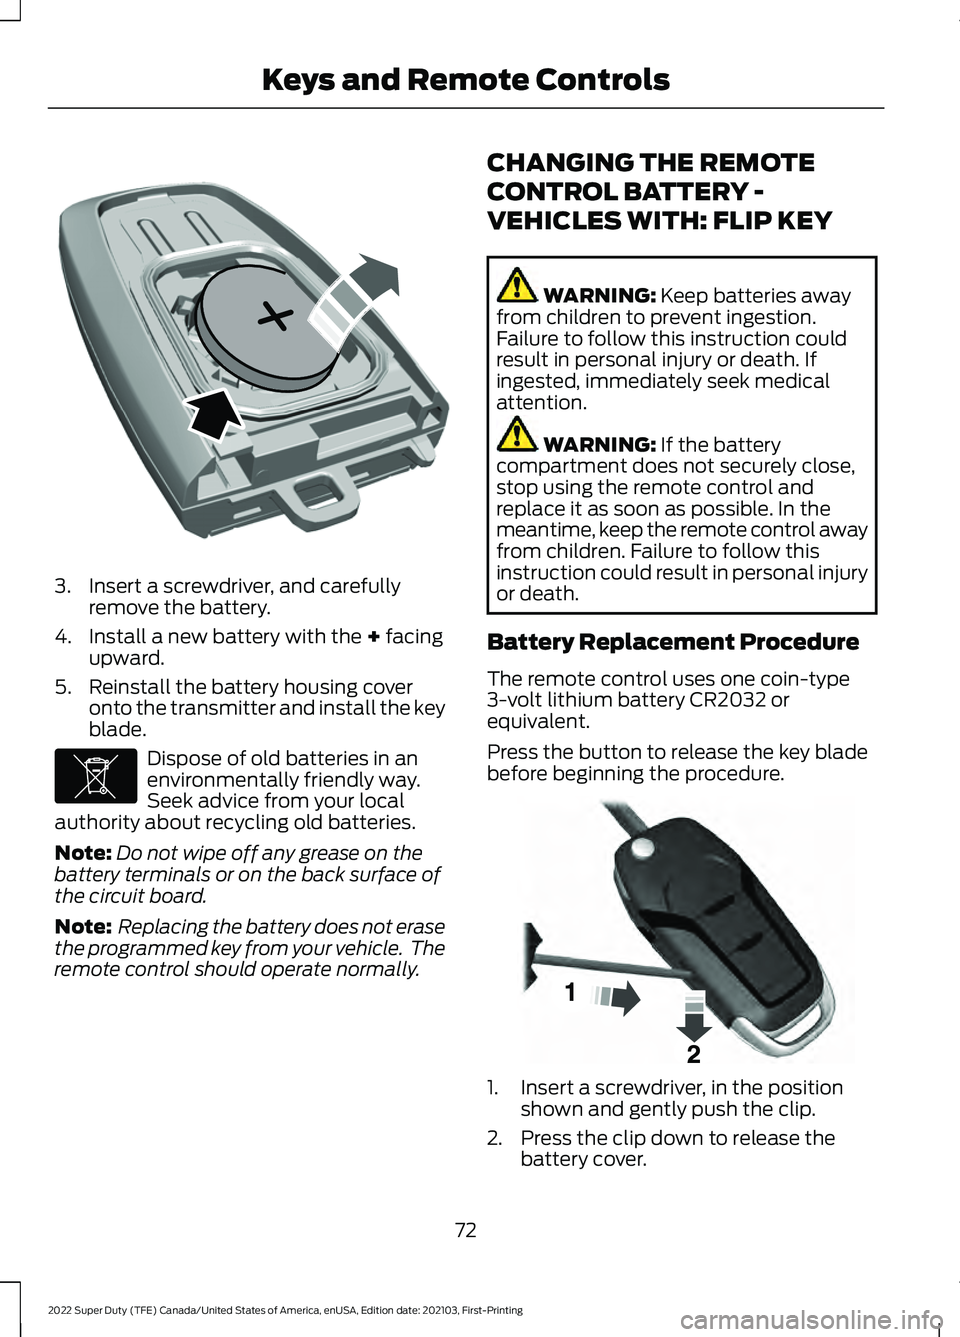 FORD F-550 2022  Owners Manual 3. Insert a screwdriver, and carefully
remove the battery.
4. Install a new battery with the + facing
upward.
5. Reinstall the battery housing cover onto the transmitter and install the key
blade. Dis